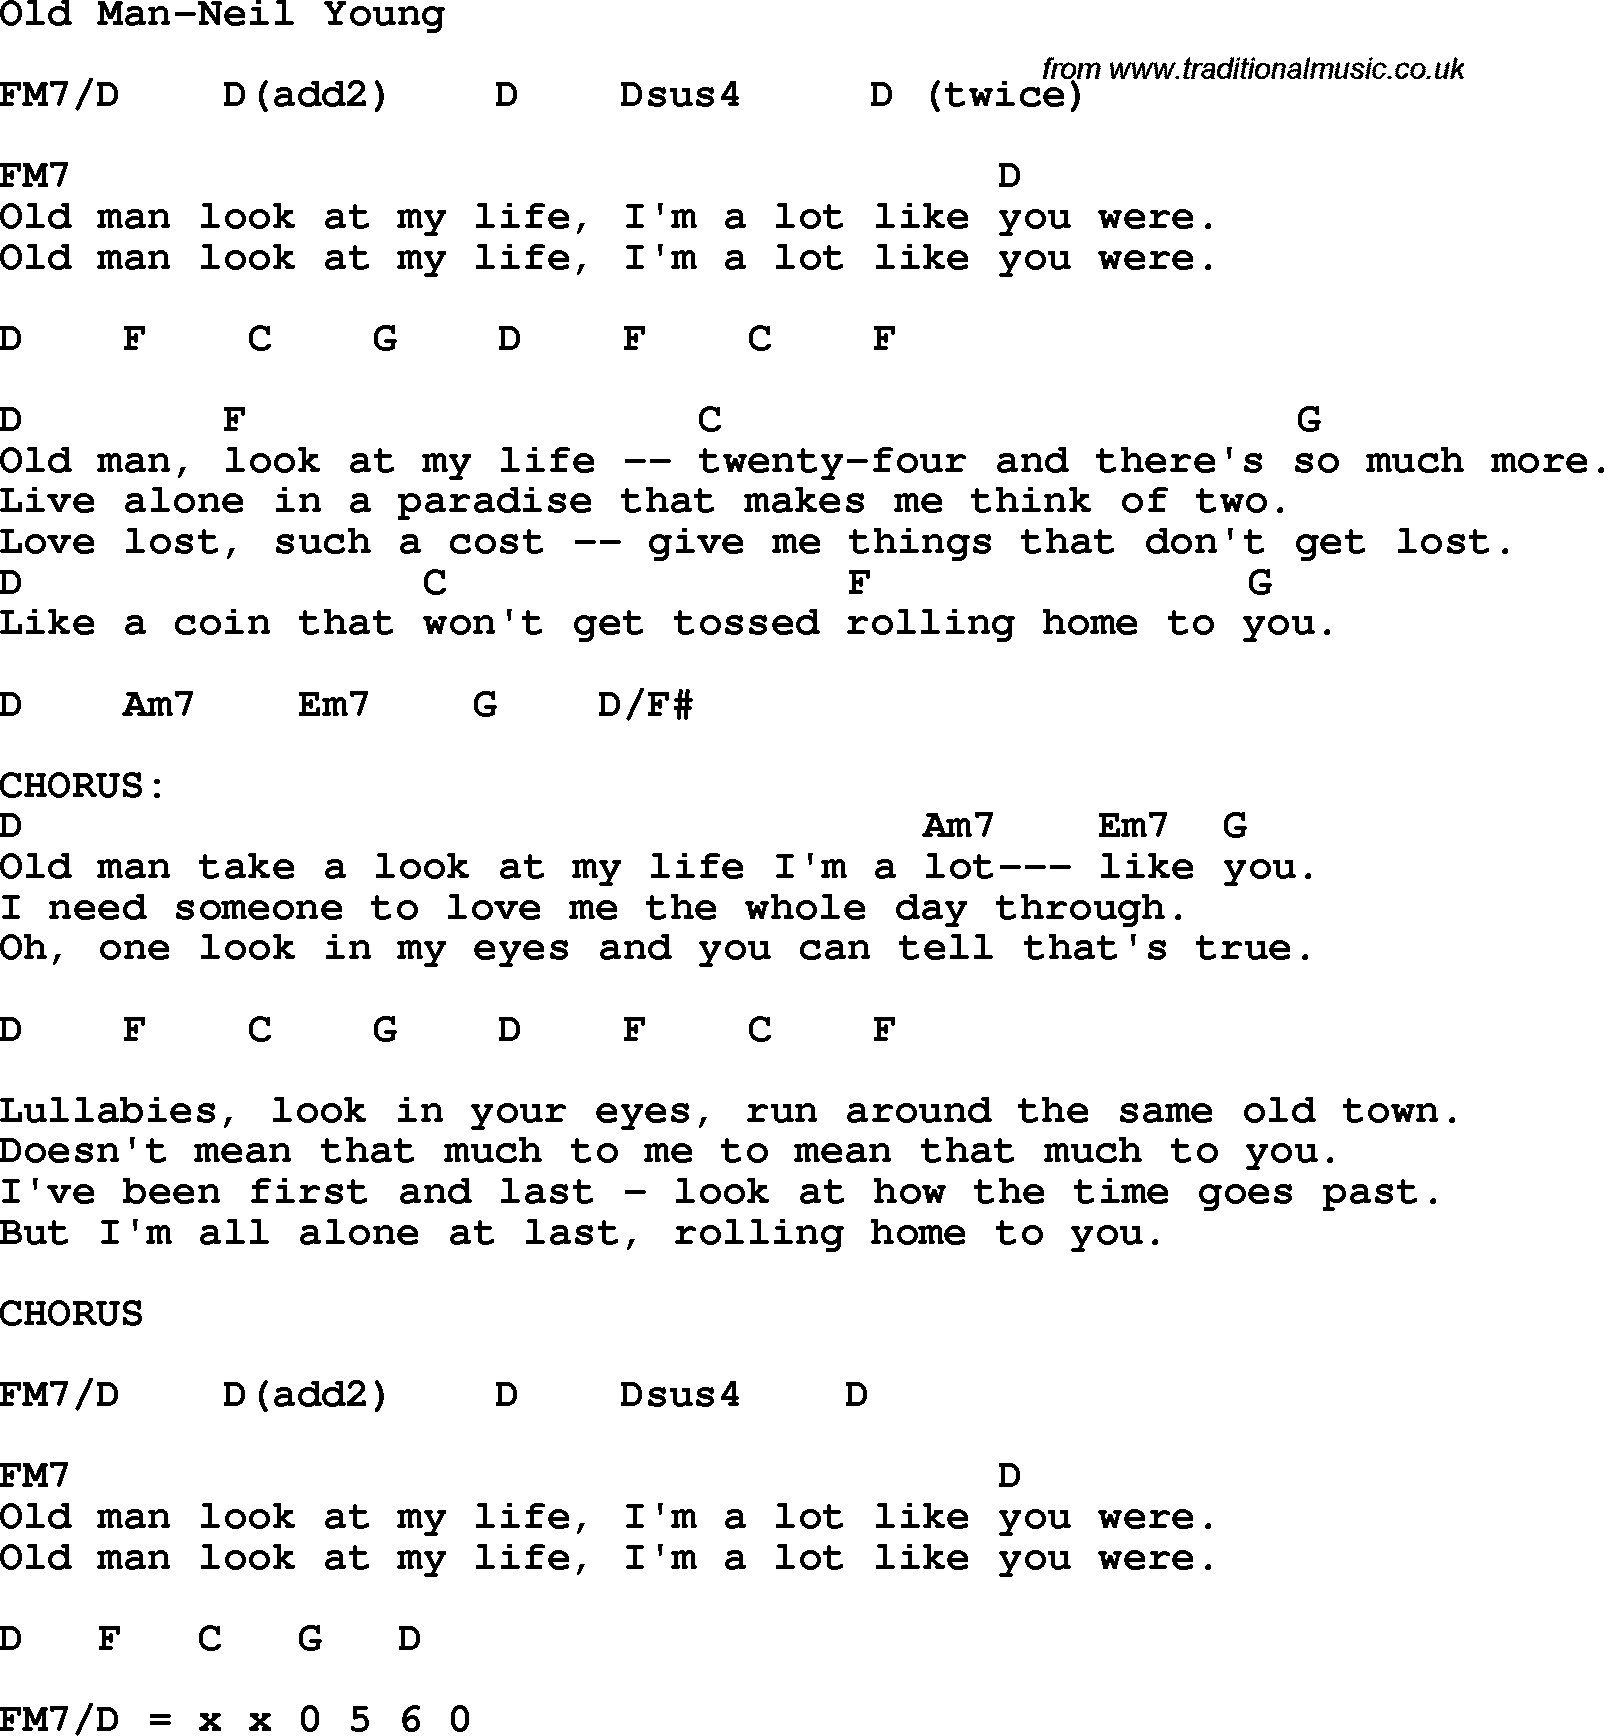 Old Man Chords Protest Song Old Man Neil Young Lyrics And Chords